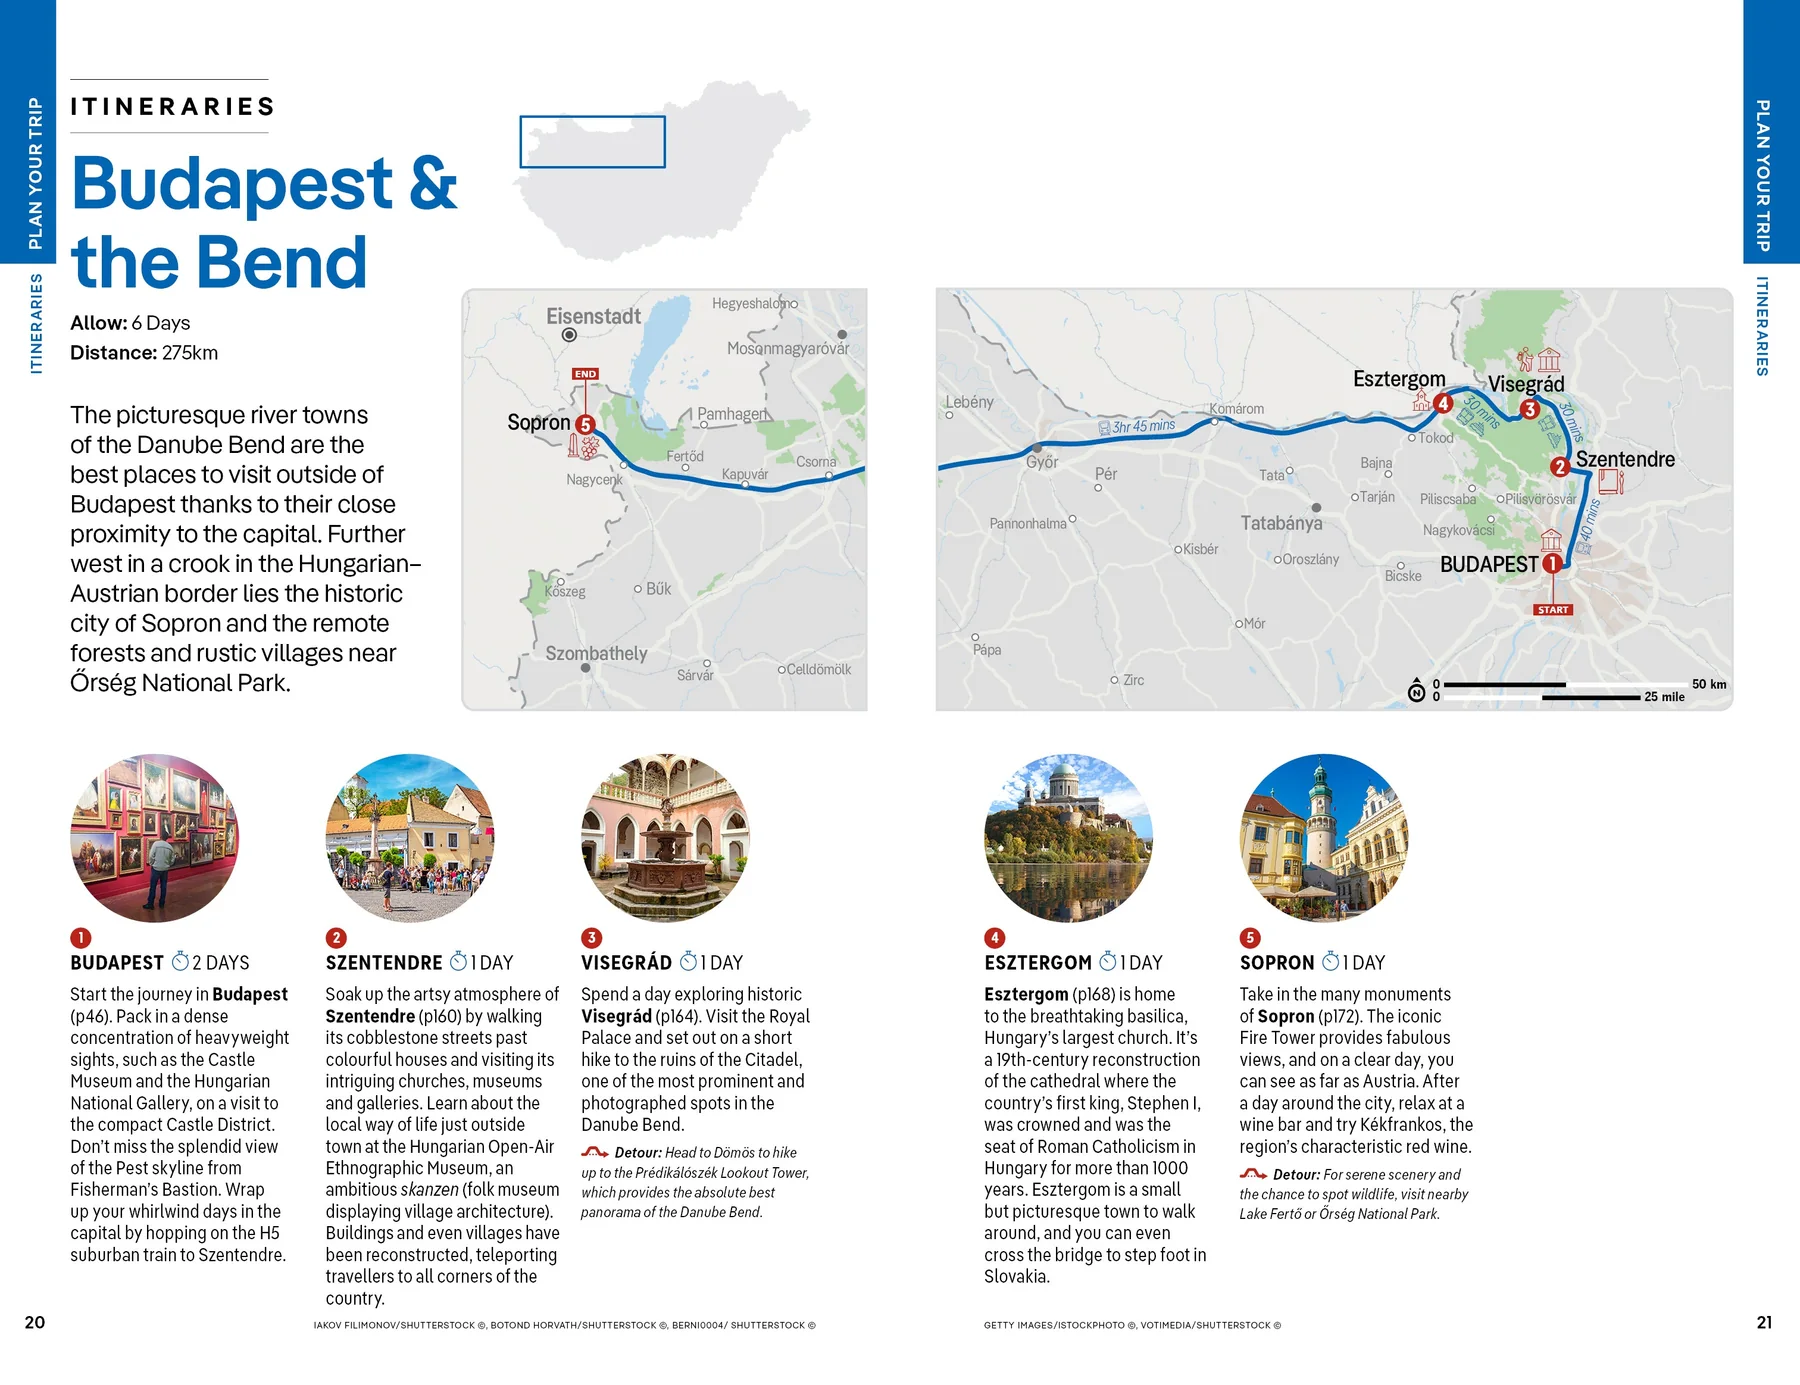 Budapest & Hungary Lonely Planet